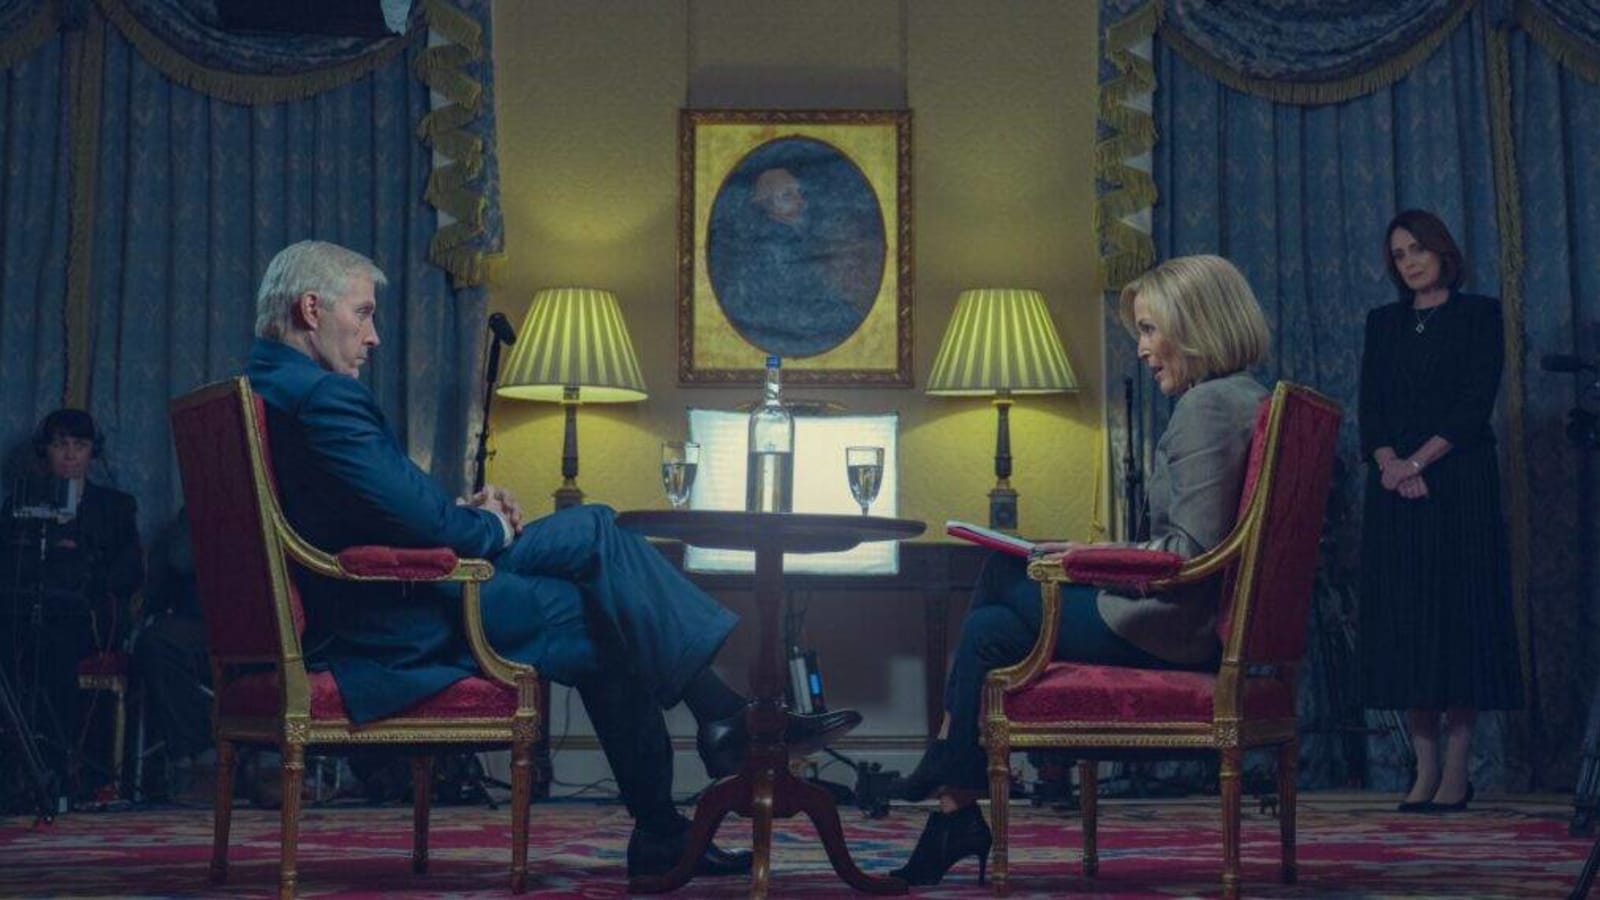 ‘Scoop’: Netflix Releases Teaser Trailer for Prince Andrew Interview Drama (Video)